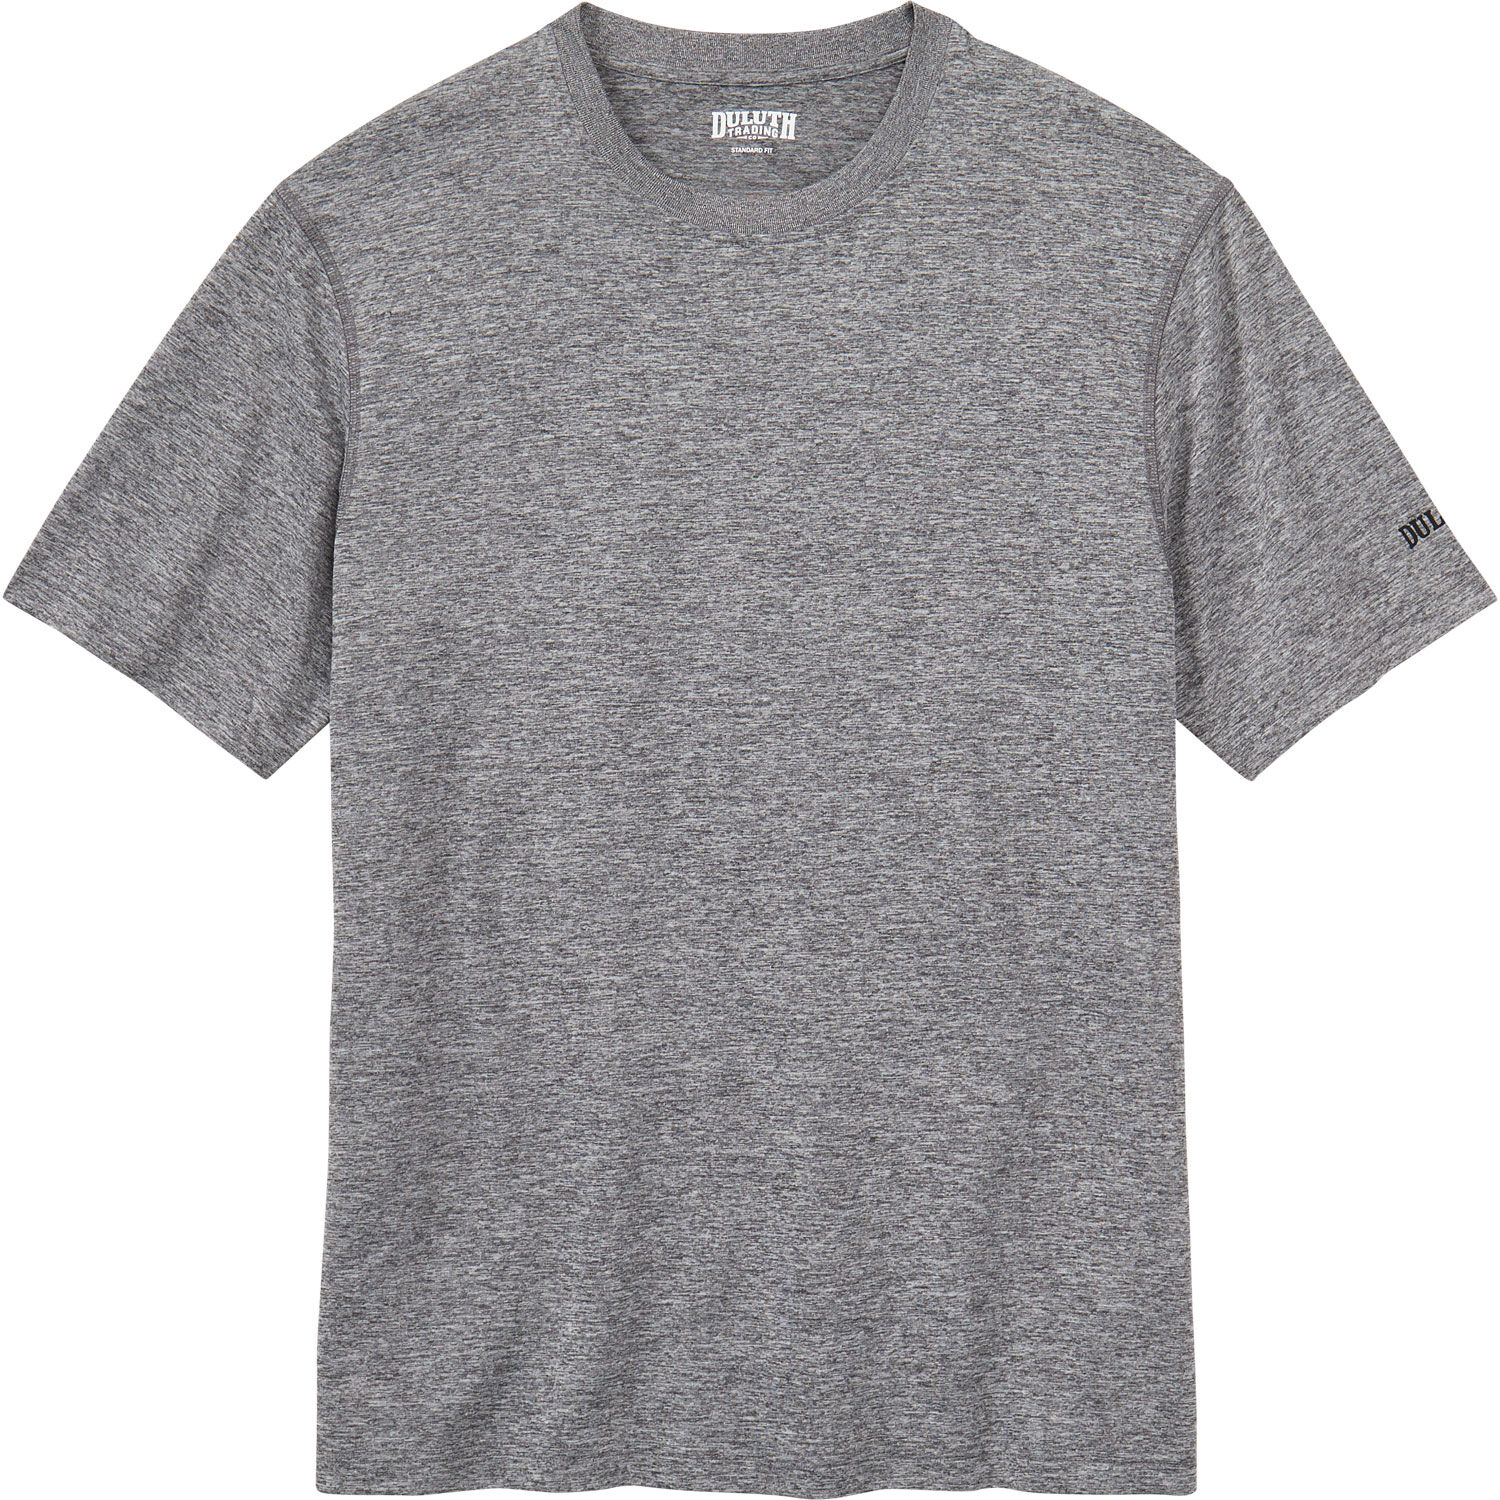 Men's Bottle Top Short Sleeve Tee | Duluth Trading Company